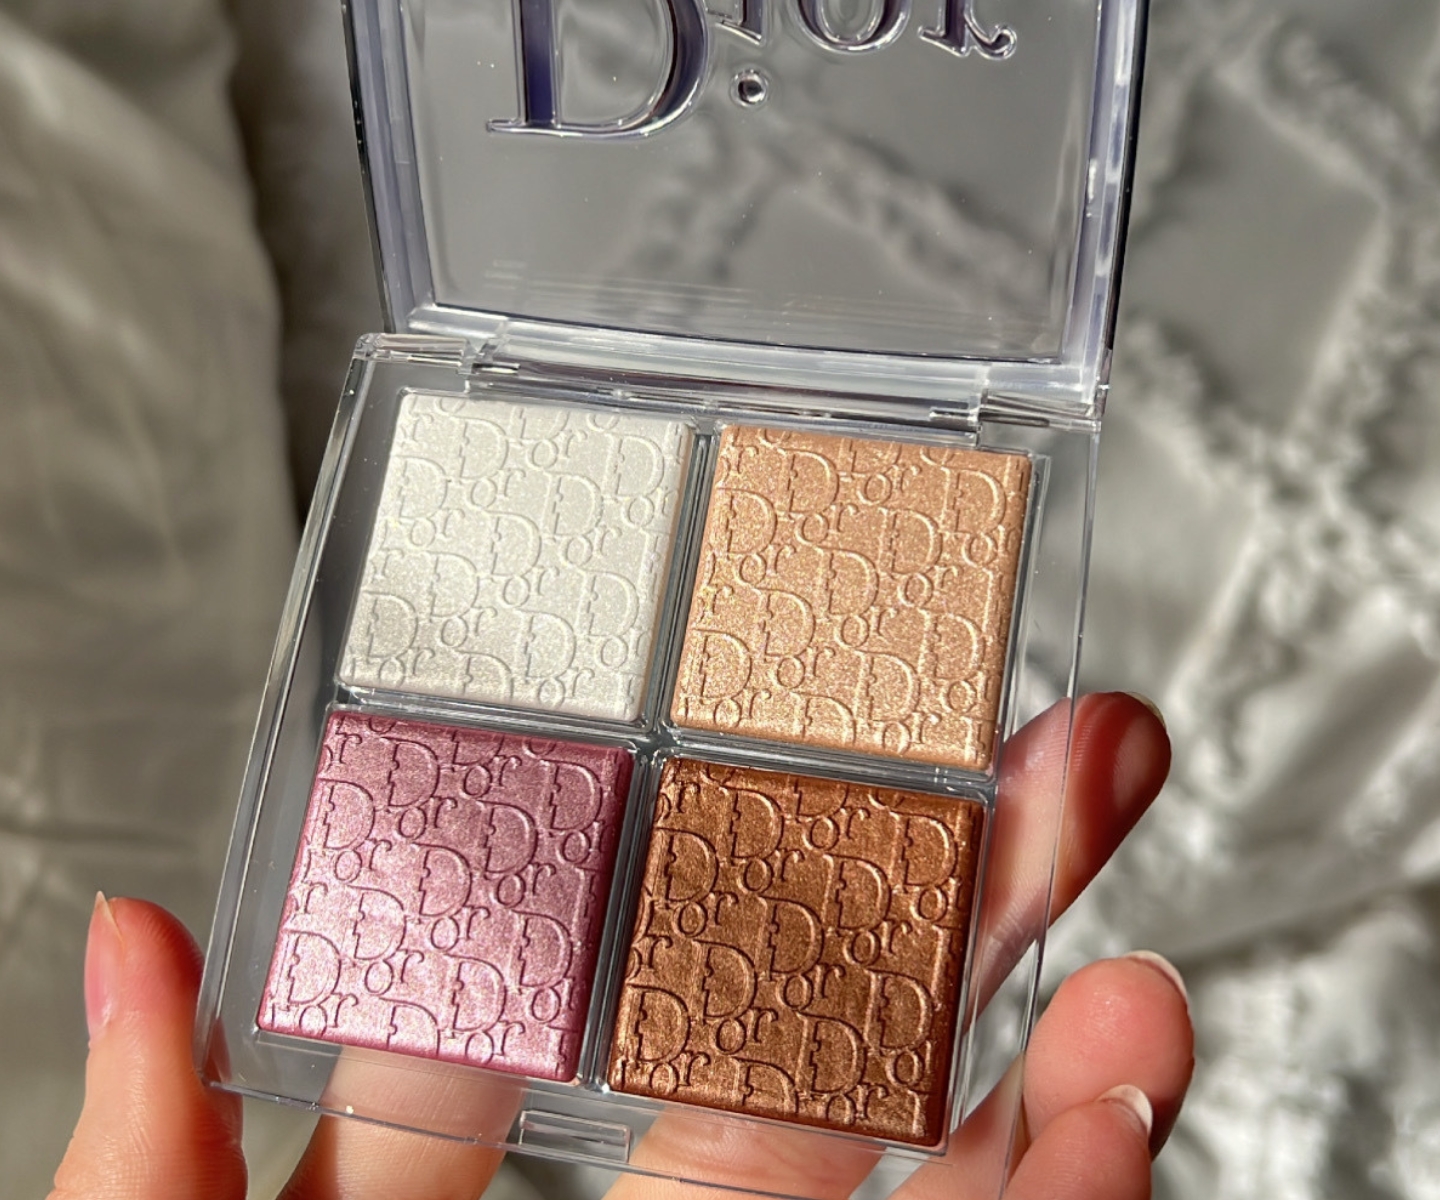 The 6 most popular Dior beauty products  Betsselling Dior beauty buys